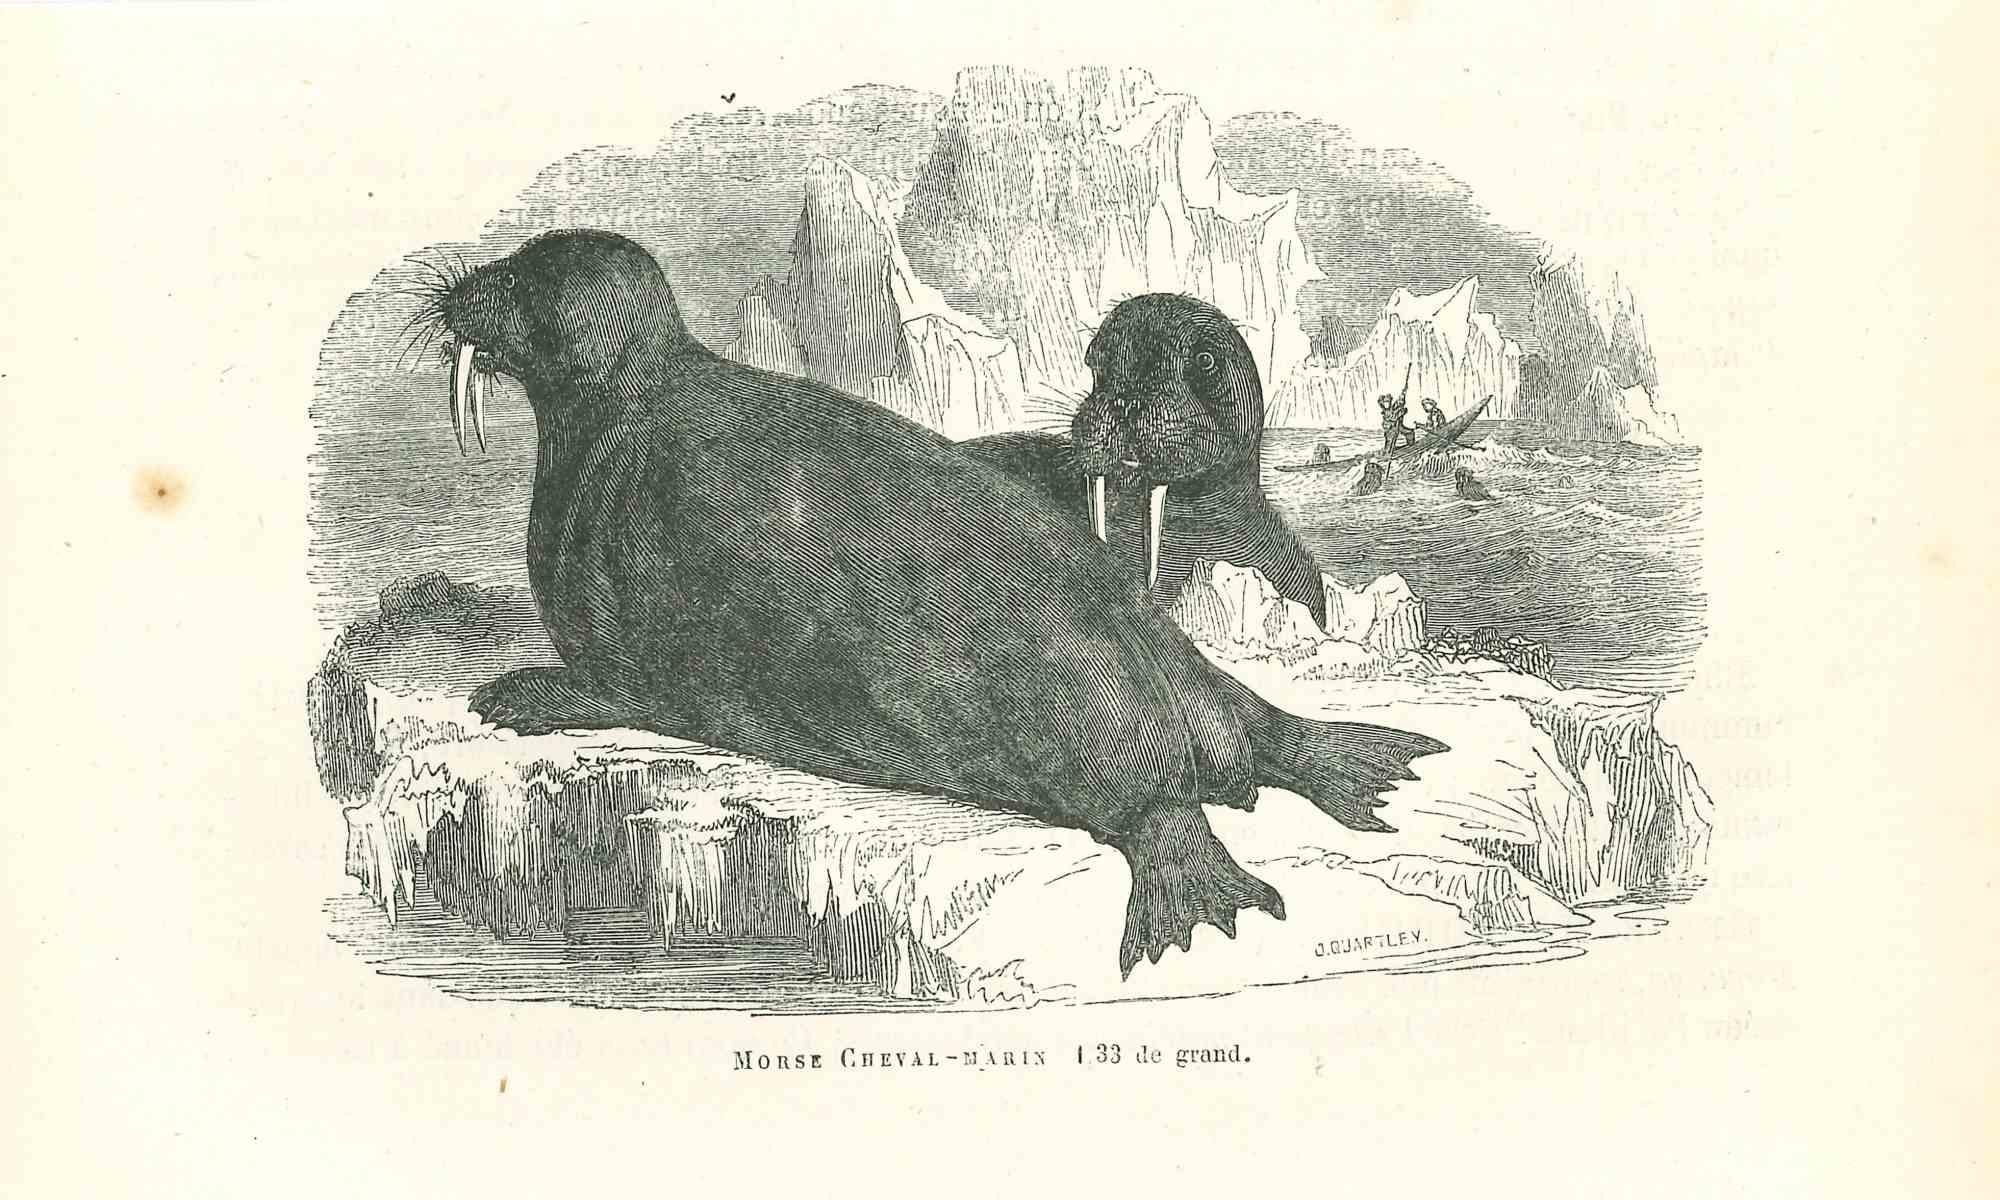 The Seals is an original lithograph on ivory-colored paper, realized by Paul Gervais (1816-1879). The artwork is from The Series of "Les Trois Règnes de la Nature", and was published in 1854.

Good conditions with minor stain.

Titled on the lower.